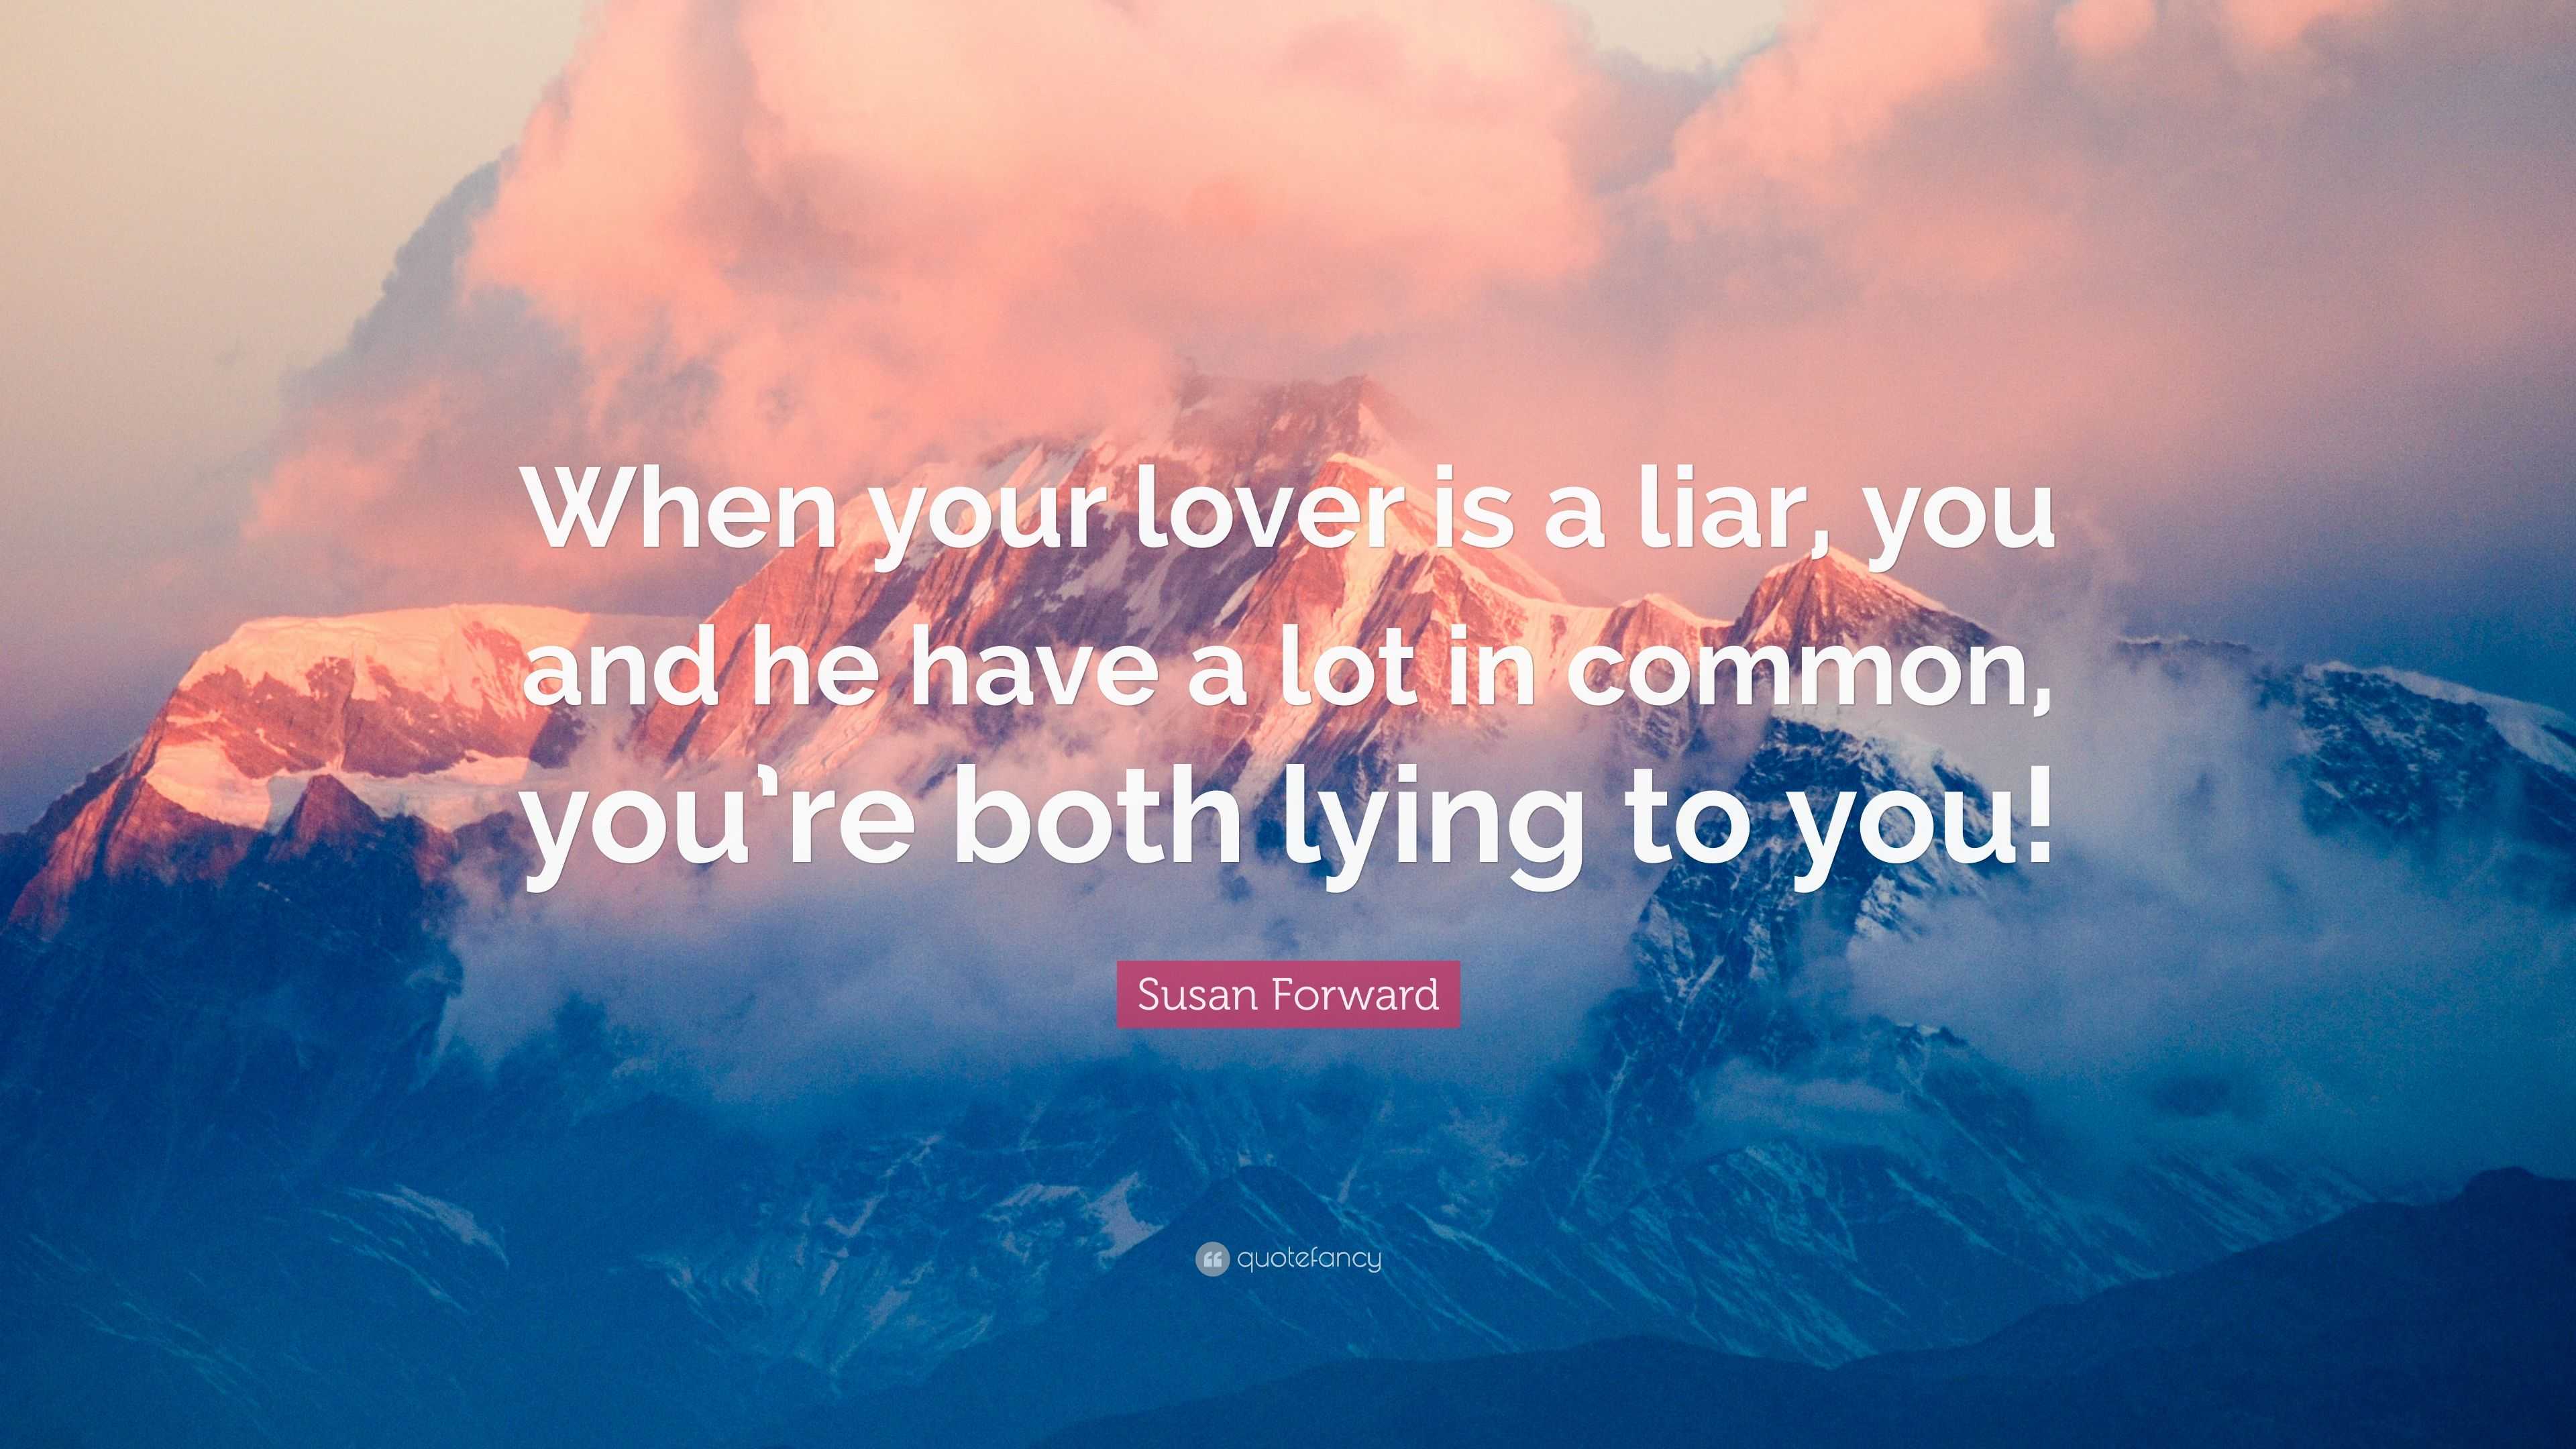 Susan Forward Quote “When your lover is a liar, you and he have a lot